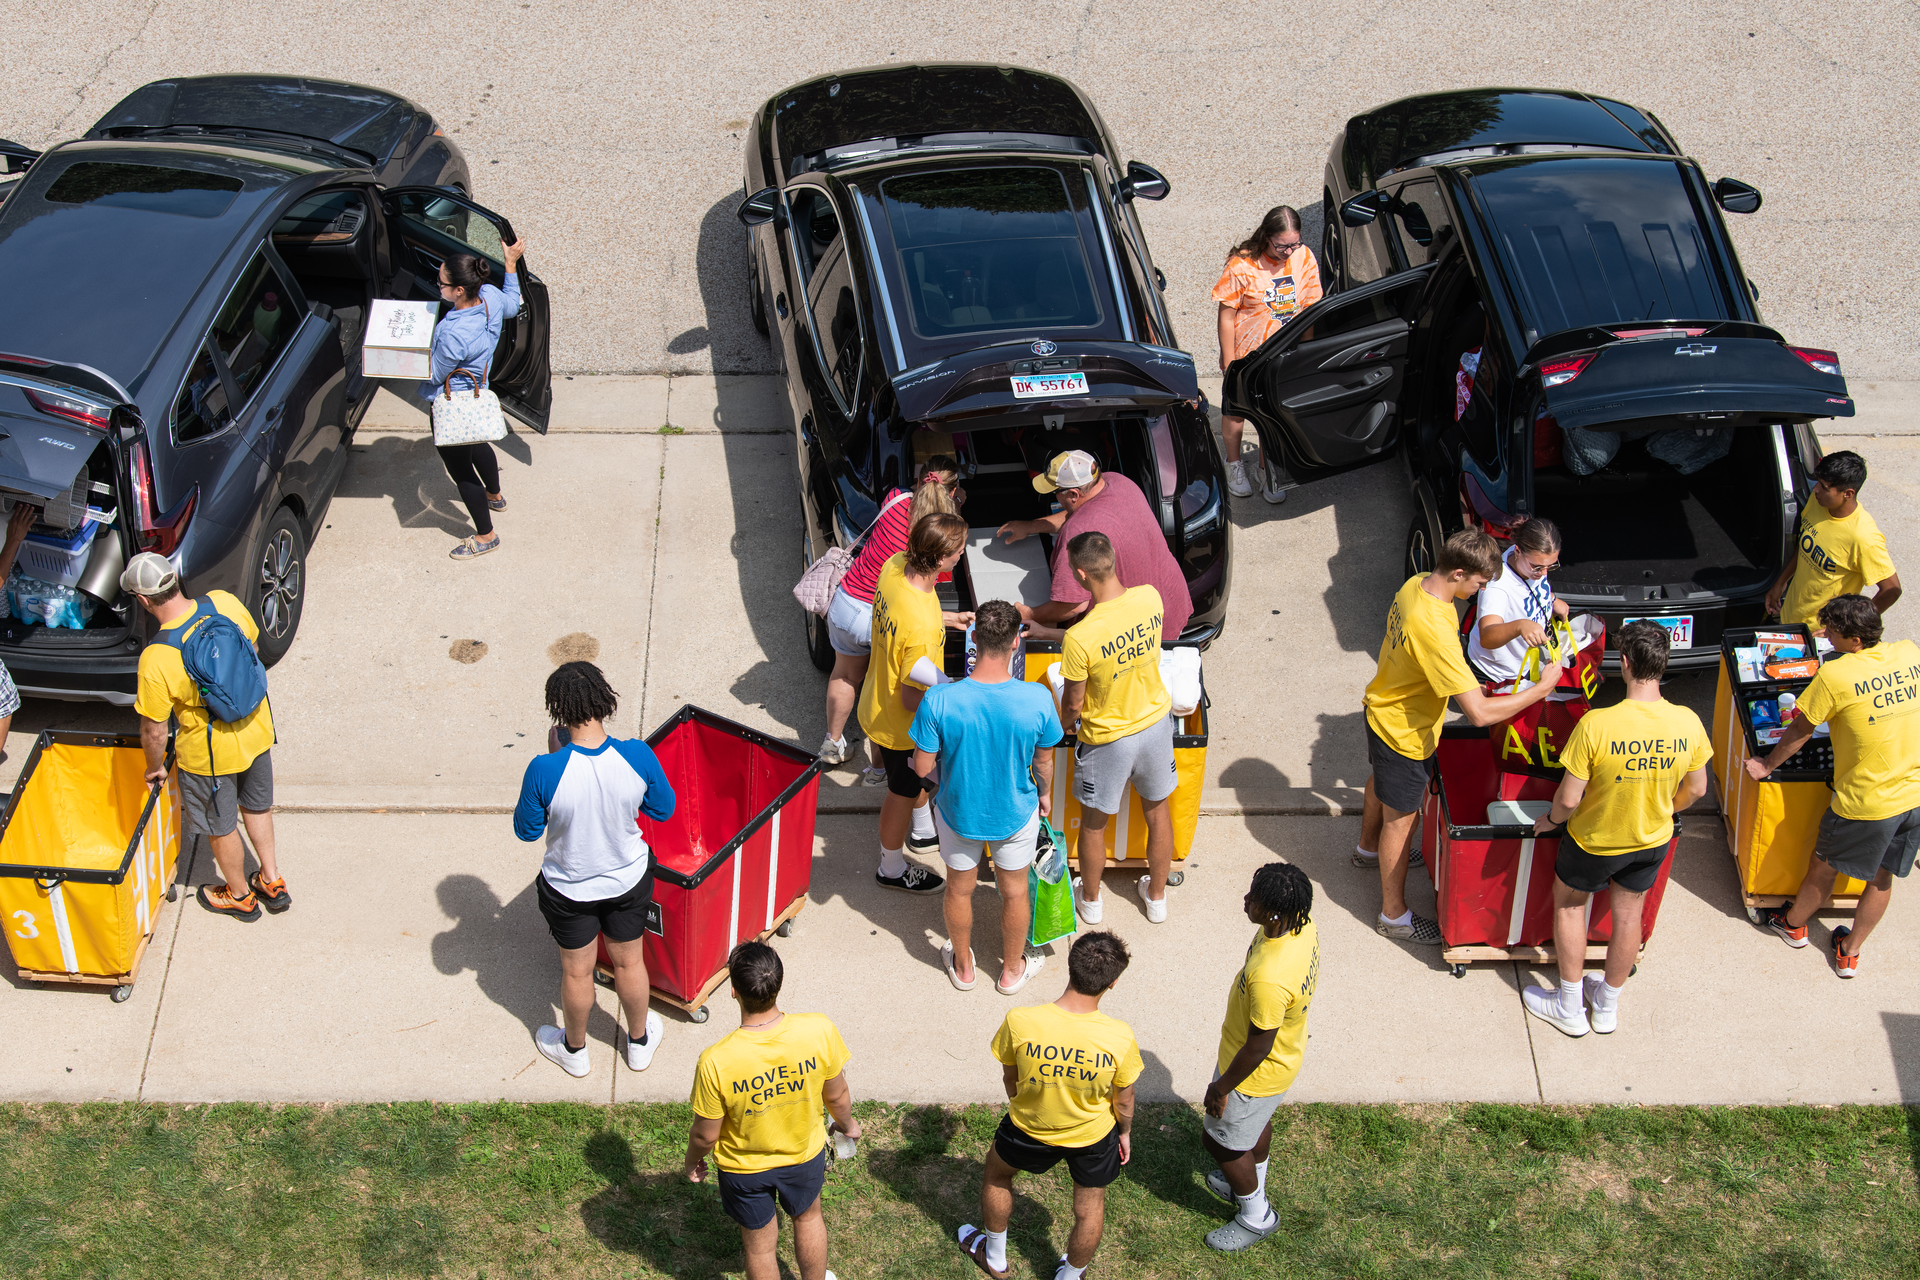 Image of move-in day with three cars parked outside and the moving crew help new students move into the residence halls